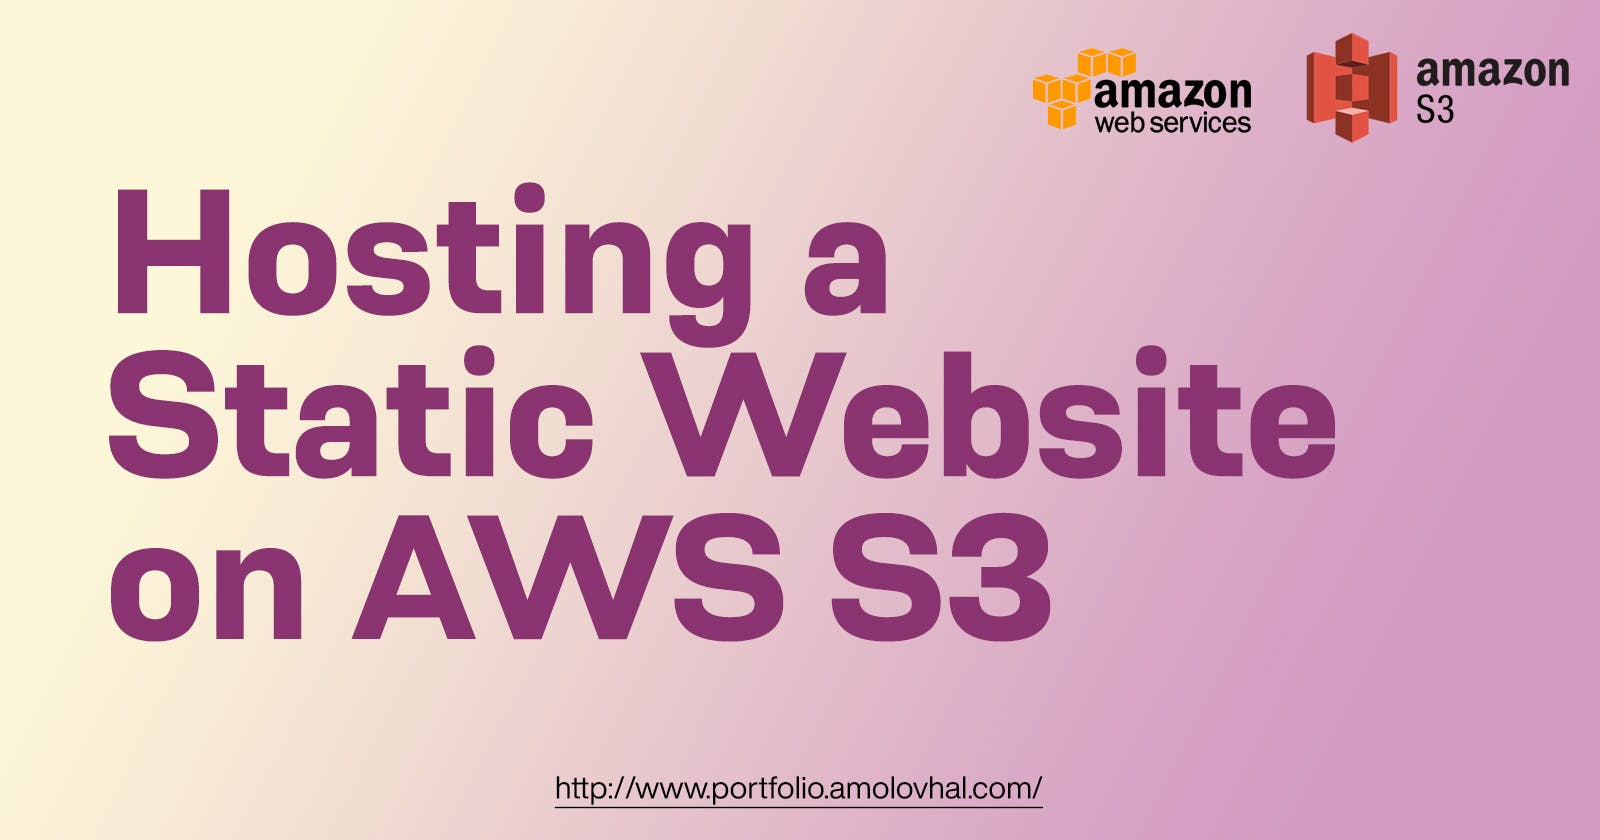 Project: Hosting a Static Website on AWS S3: A Step-by-Step Guide